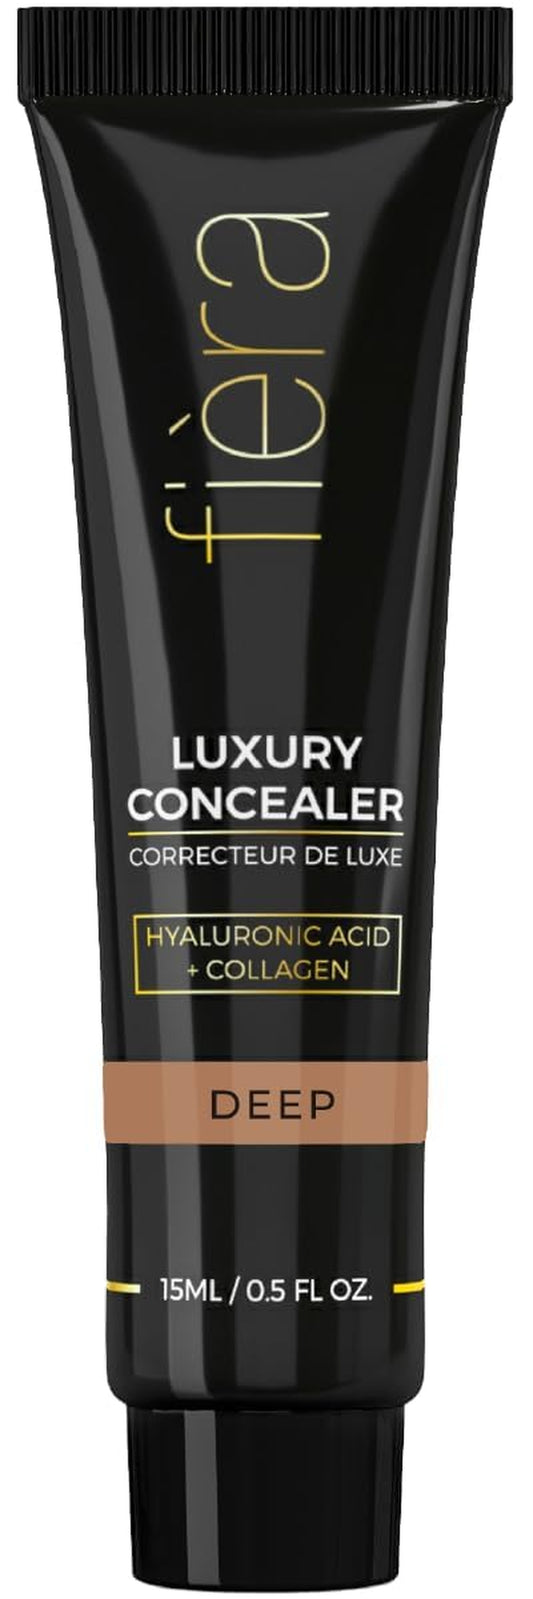 Luxury Concealer with Anti-Aging - All Day Coverage for Dark Circles, Fine Lines, Wrinkles & Spots - Deep, 0.5 Ounce